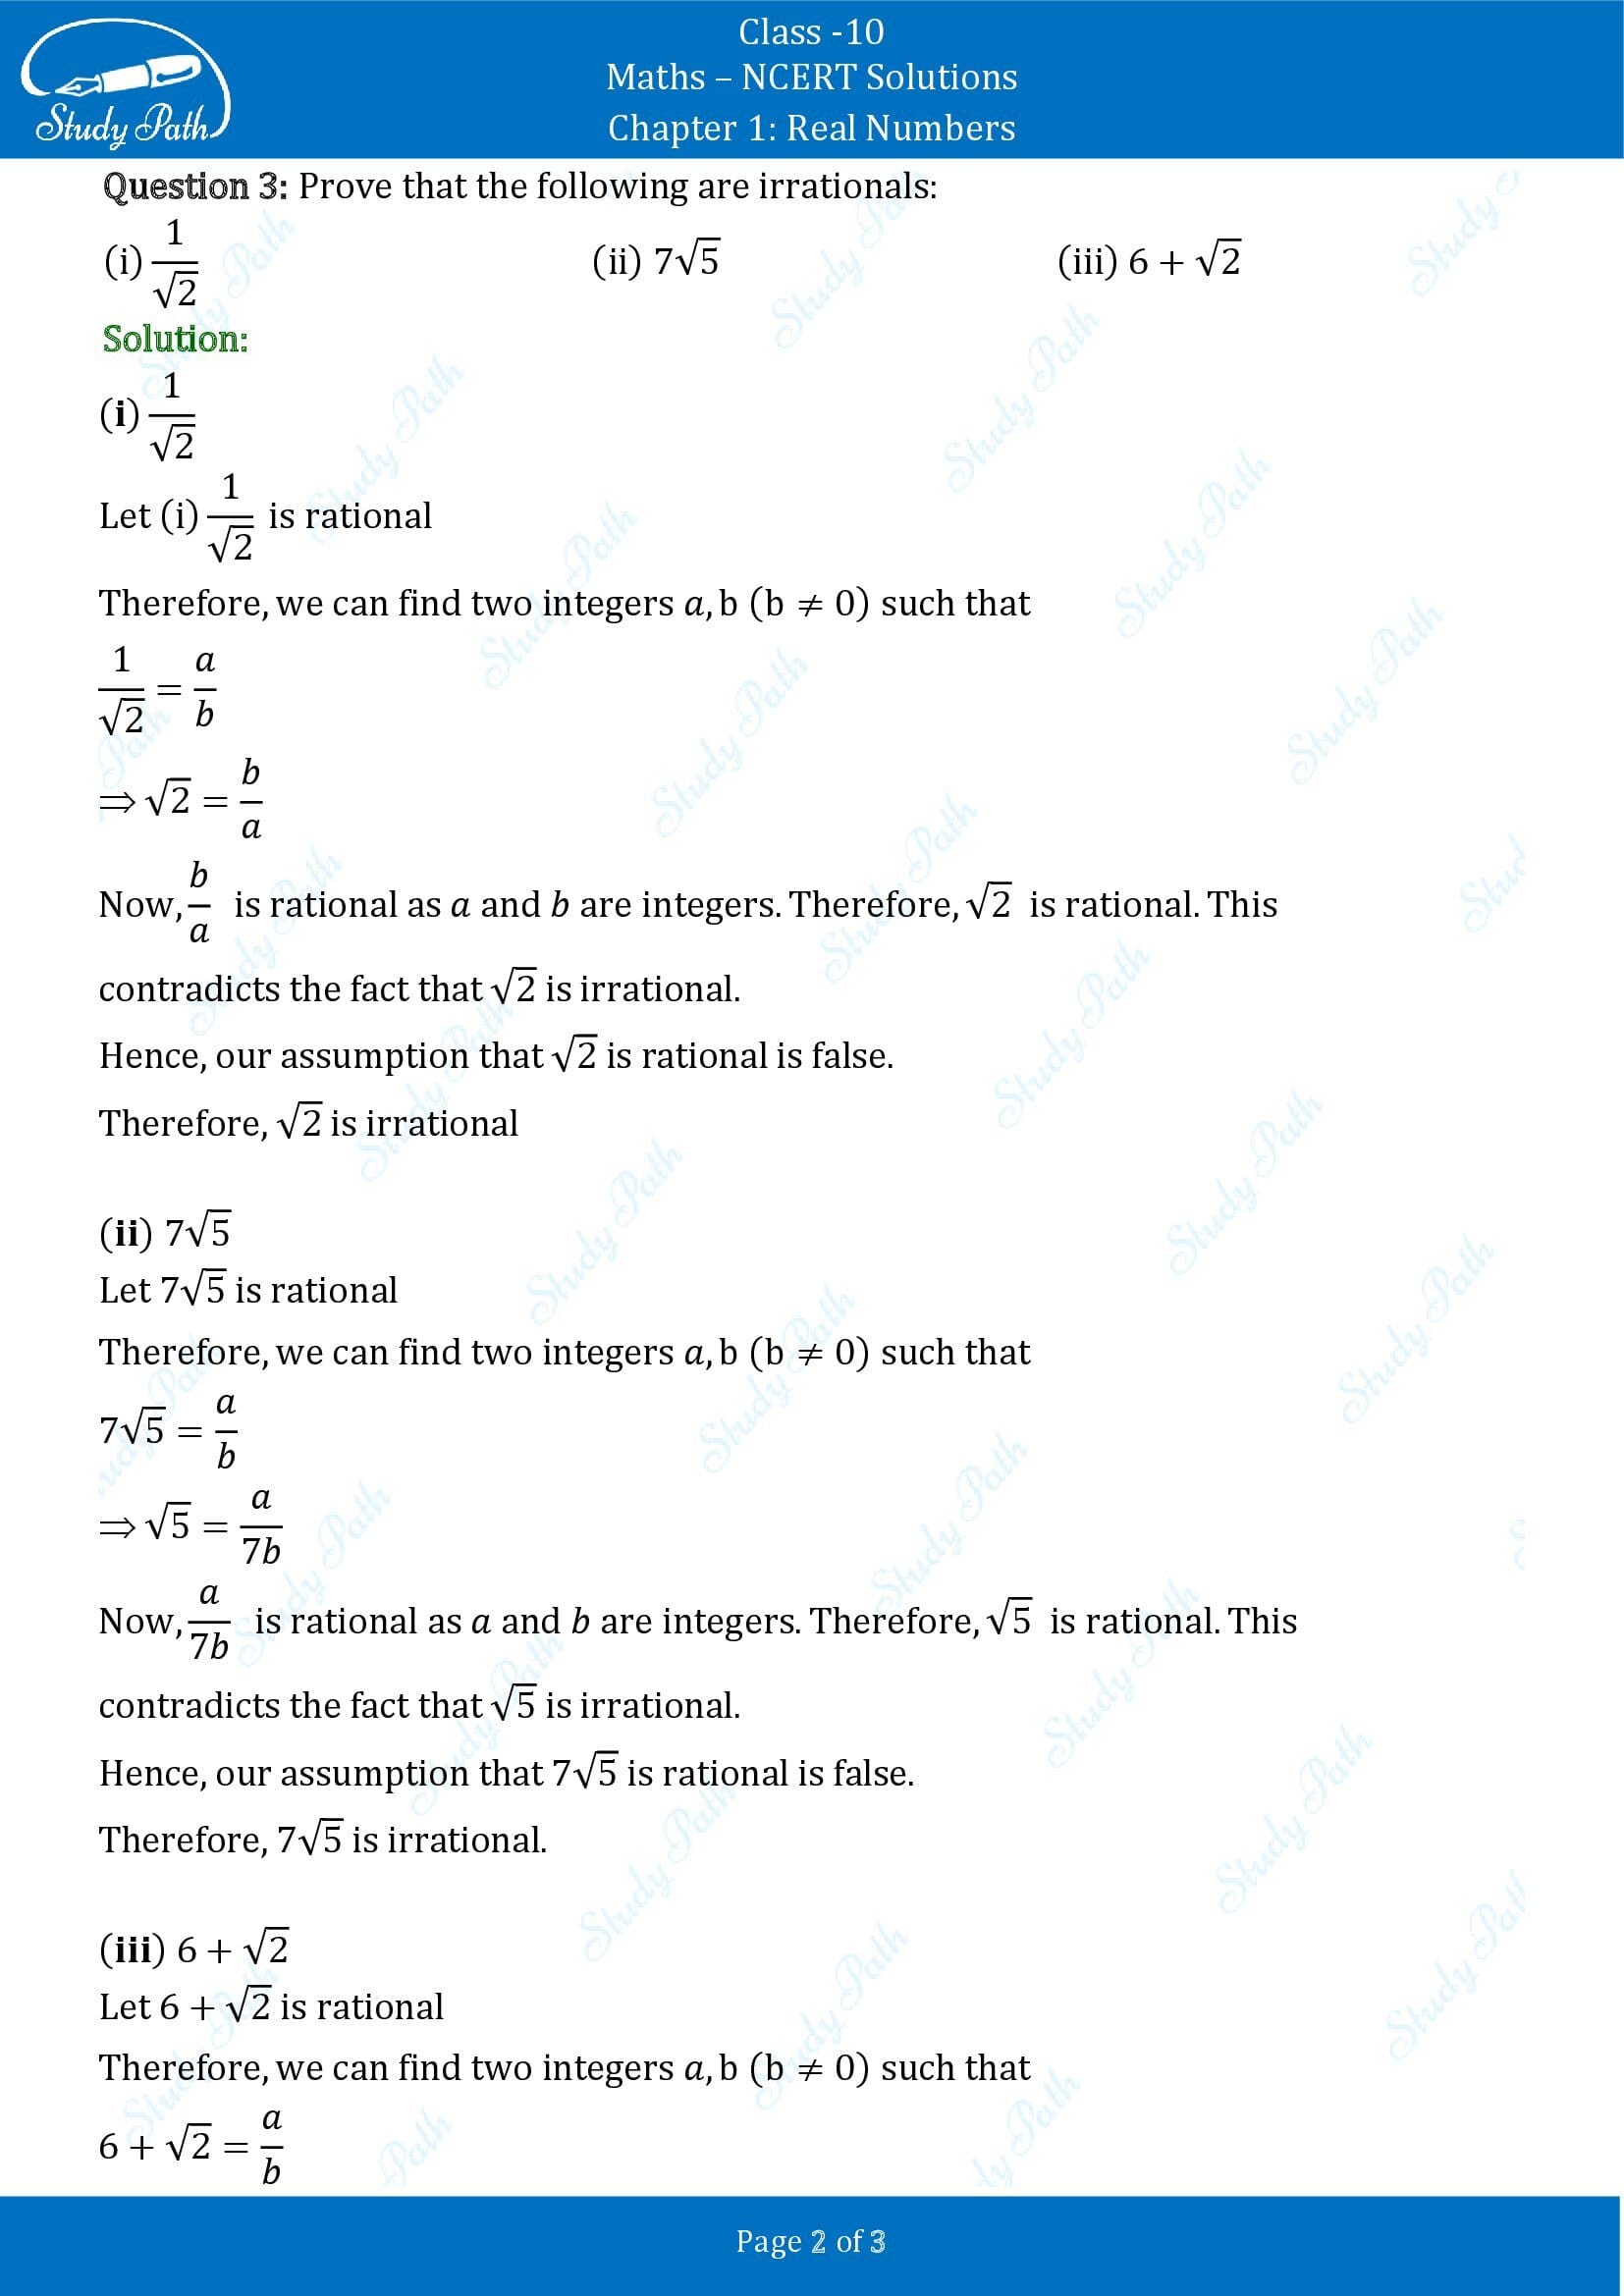 NCERT Solutions for Class 10 Maths Chapter 1 Real Numbers Exercise 1.3 00002